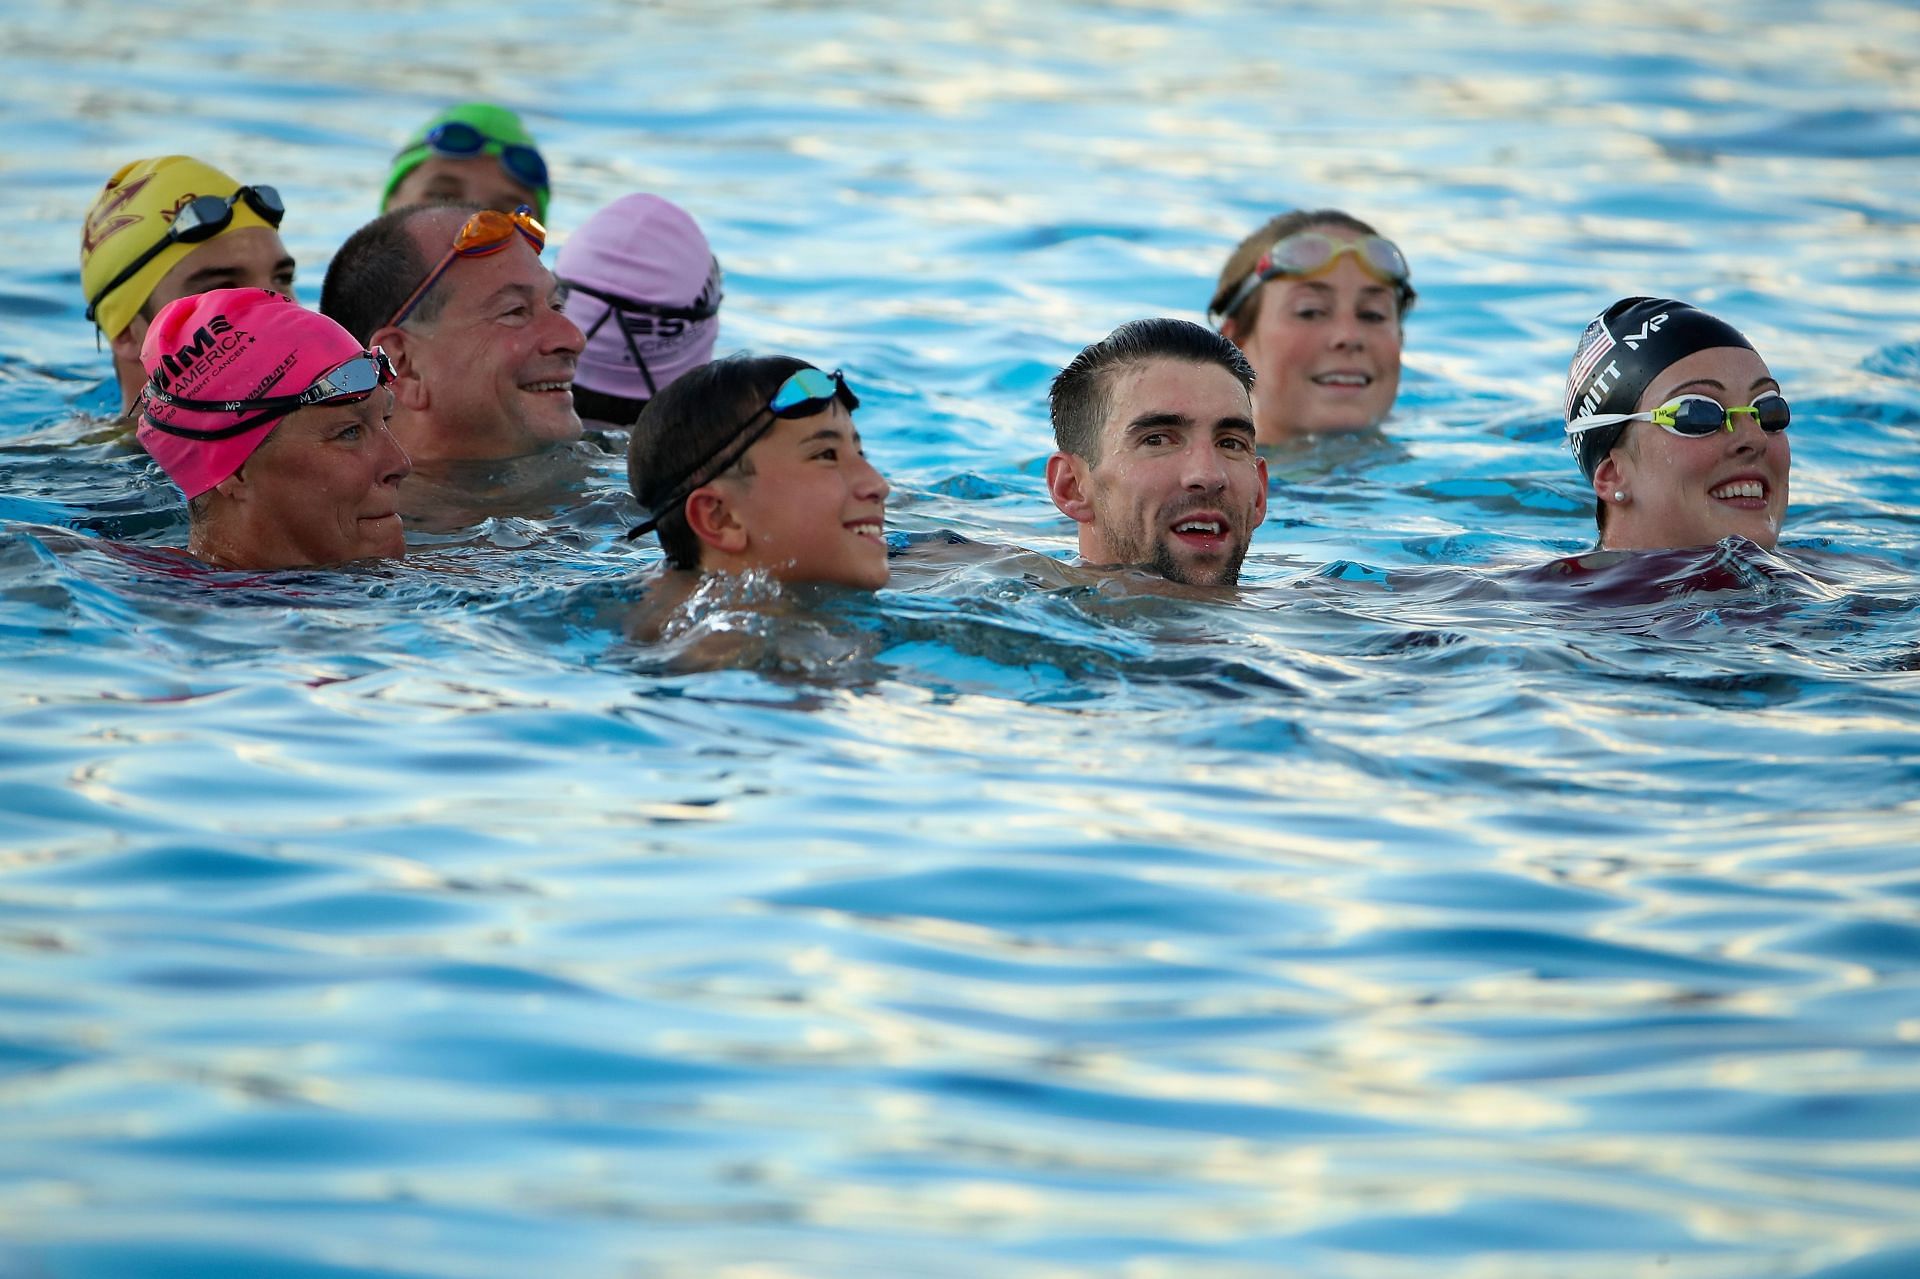 Michael Phelps and three-time Olympian Allison Schmitt participate in a charity swim (Photo by Christian Petersen/Getty Images)